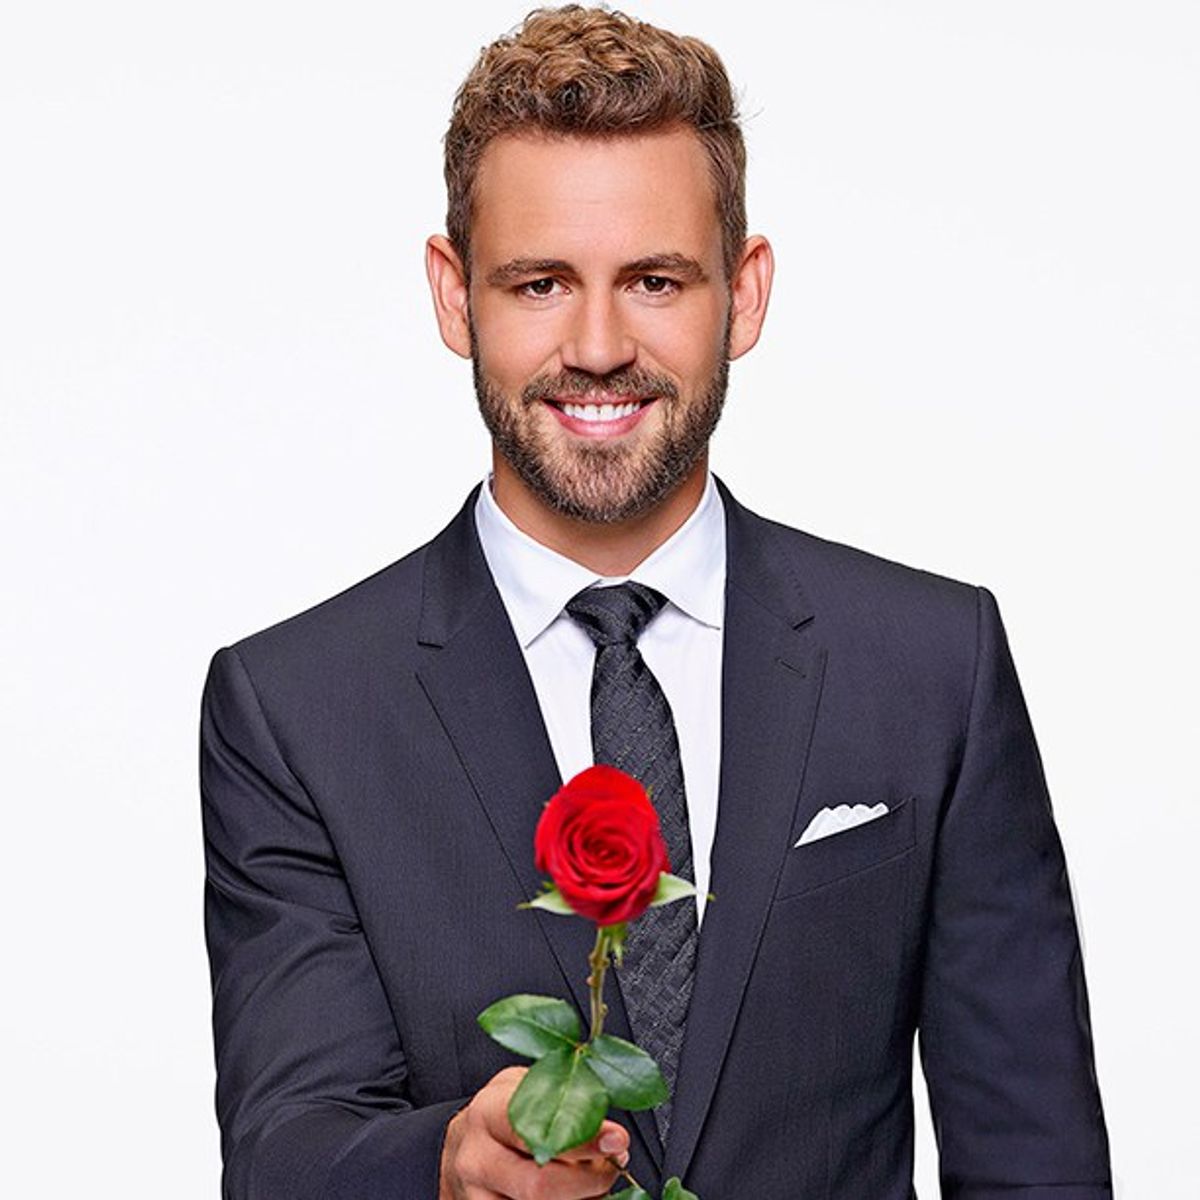 11 Reasons Why You Should Dress Your Best Every Day, As Told By The Bachelor